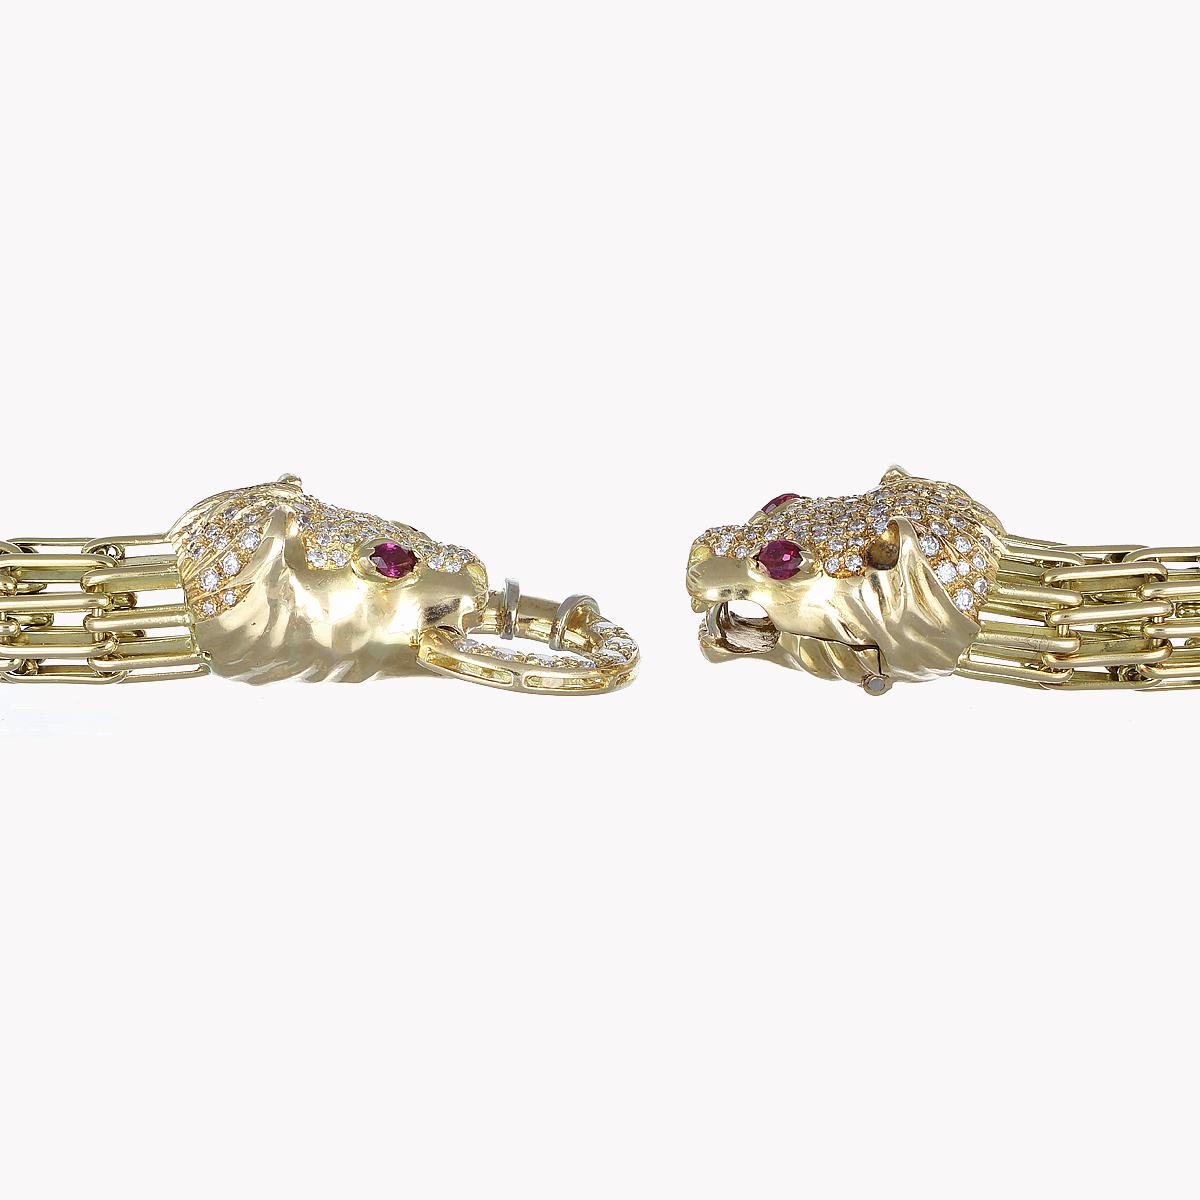 Women's AIG Panther Parure Diamonds 5.79 Ct Marquise Rubies 2 Ct 18Kt Gold Set 3 Pieces For Sale